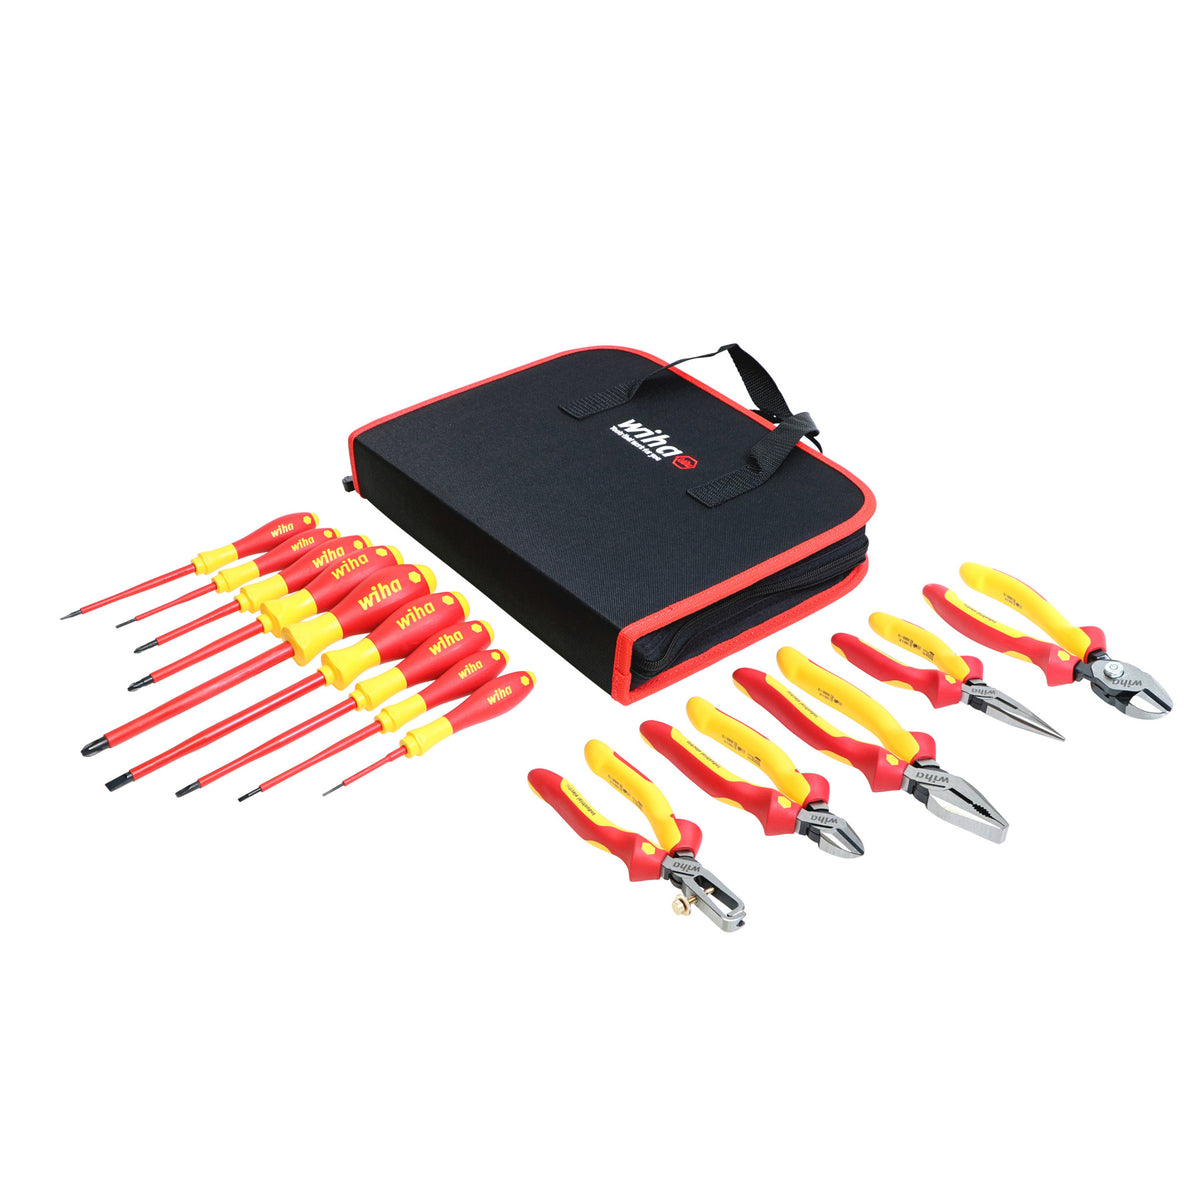 14 Piece Insulated Pliers-Cutters and Screwdriver Set